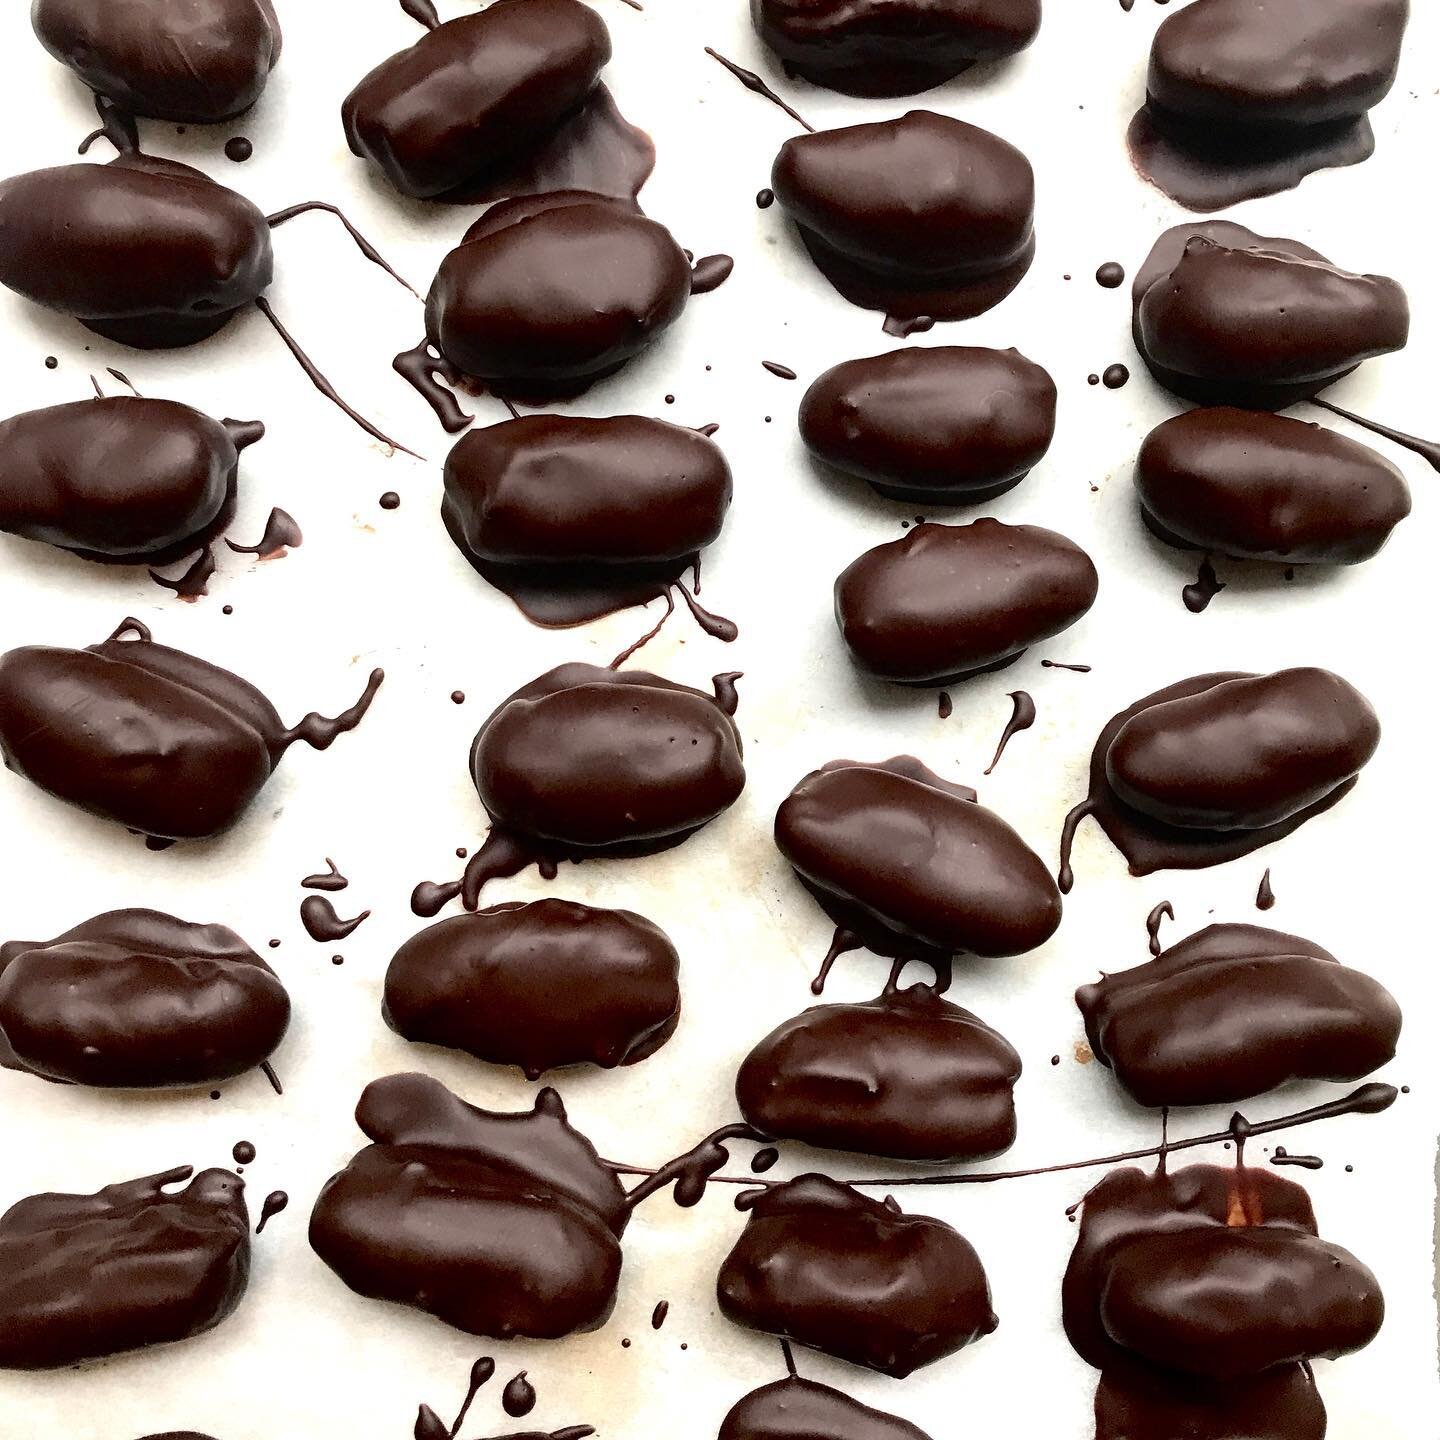 Today&rsquo;s craving&hellip; lightly roasted almonds tucked into caramel-like deglet nour dates, all bathed in dark chocolate from Madagascar. 

We just love the little splashed and swirls of chocolate that create painterly abstract swirls which are